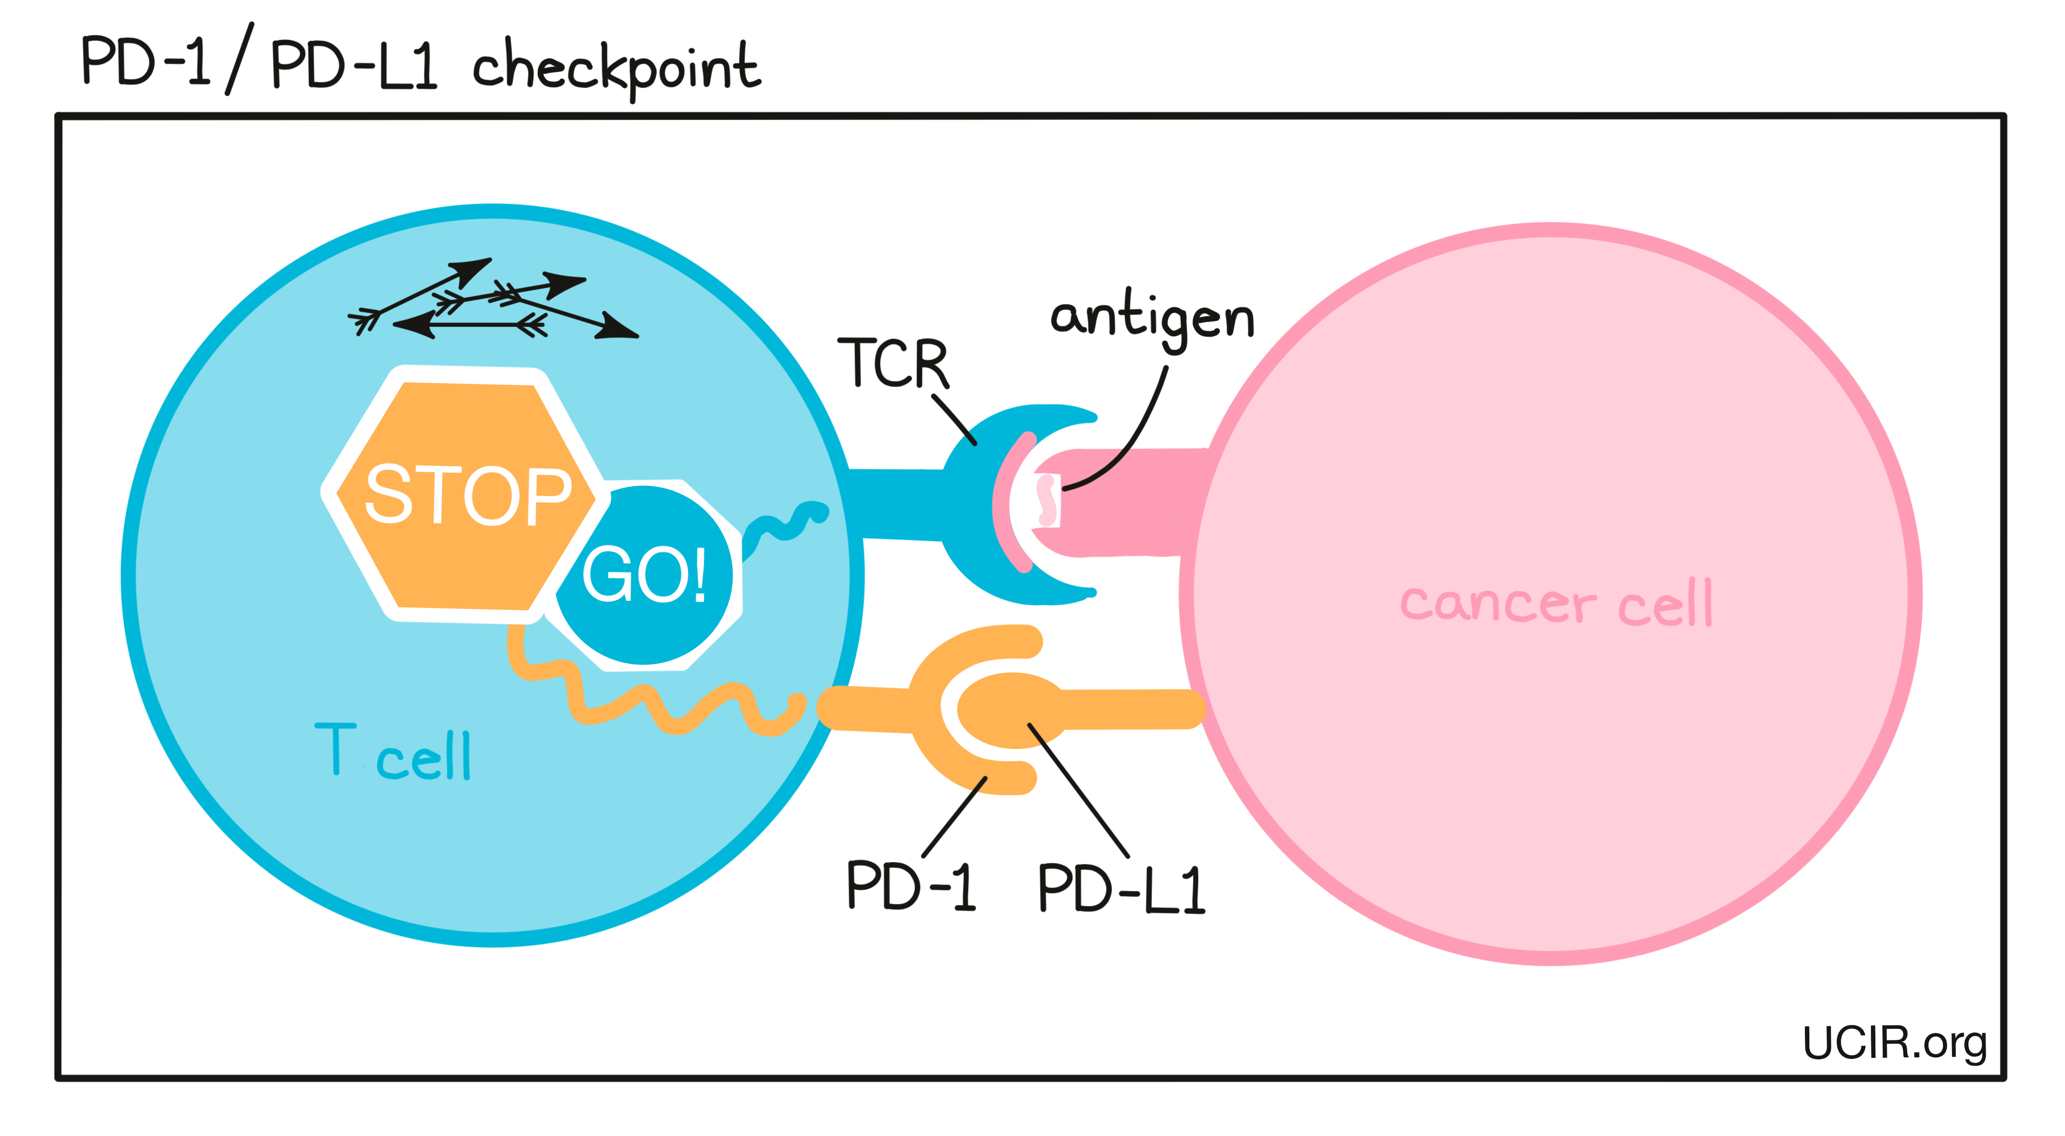 PD-1/PD-L1 checkpoint illustration